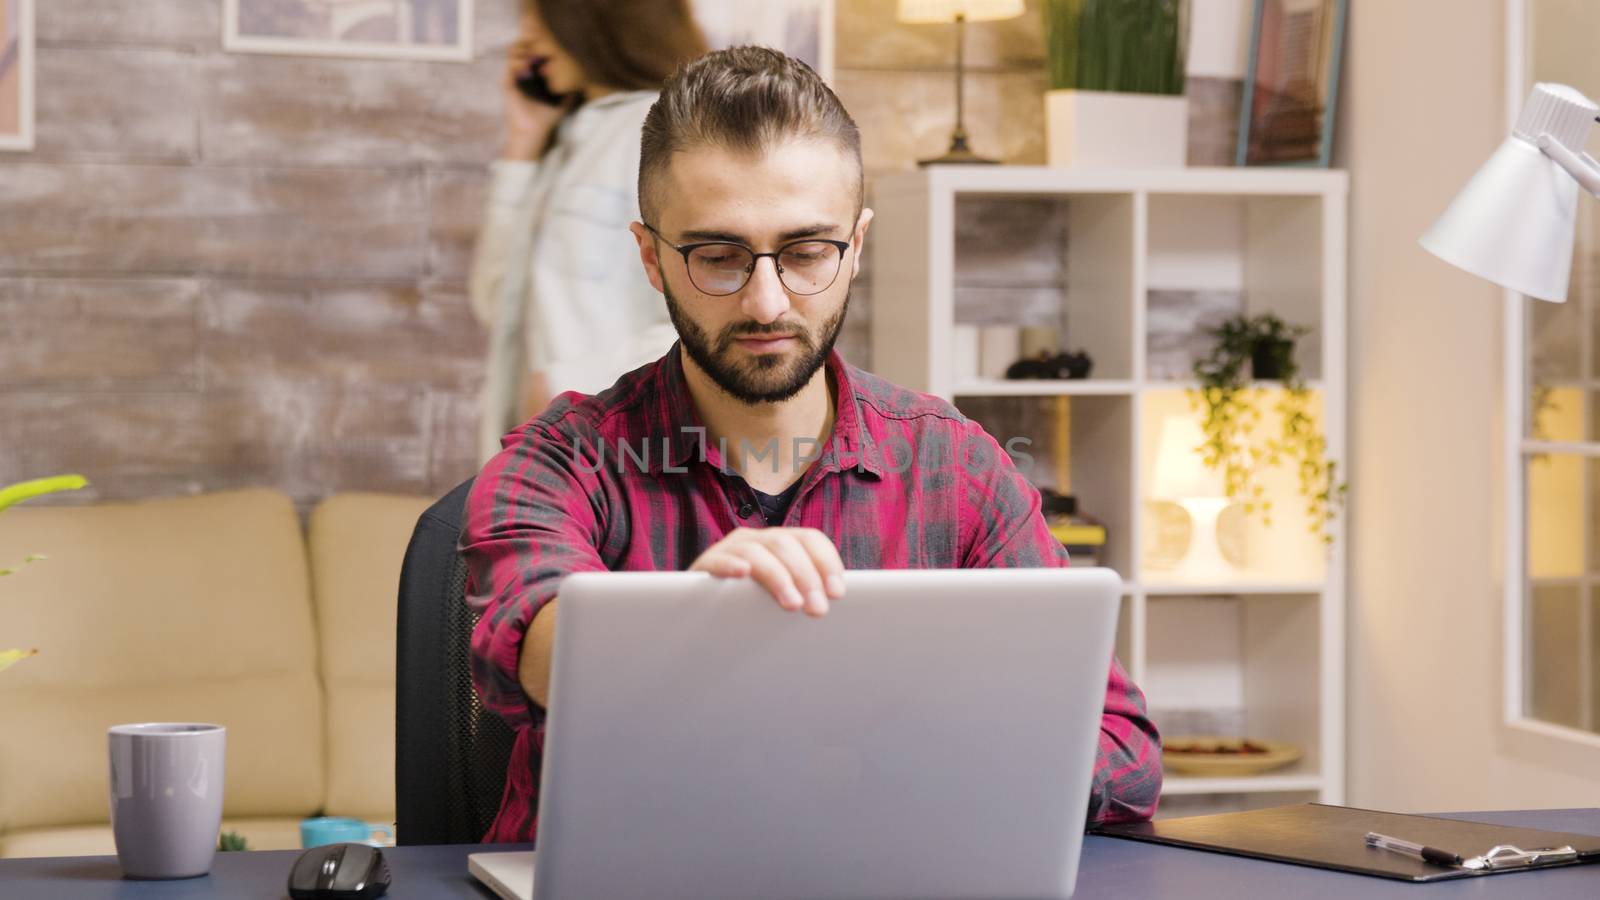 Handsome entrepreneur taking a sip of coffee while working on laptop in living room. Girlfriend in the background talks on the phone.